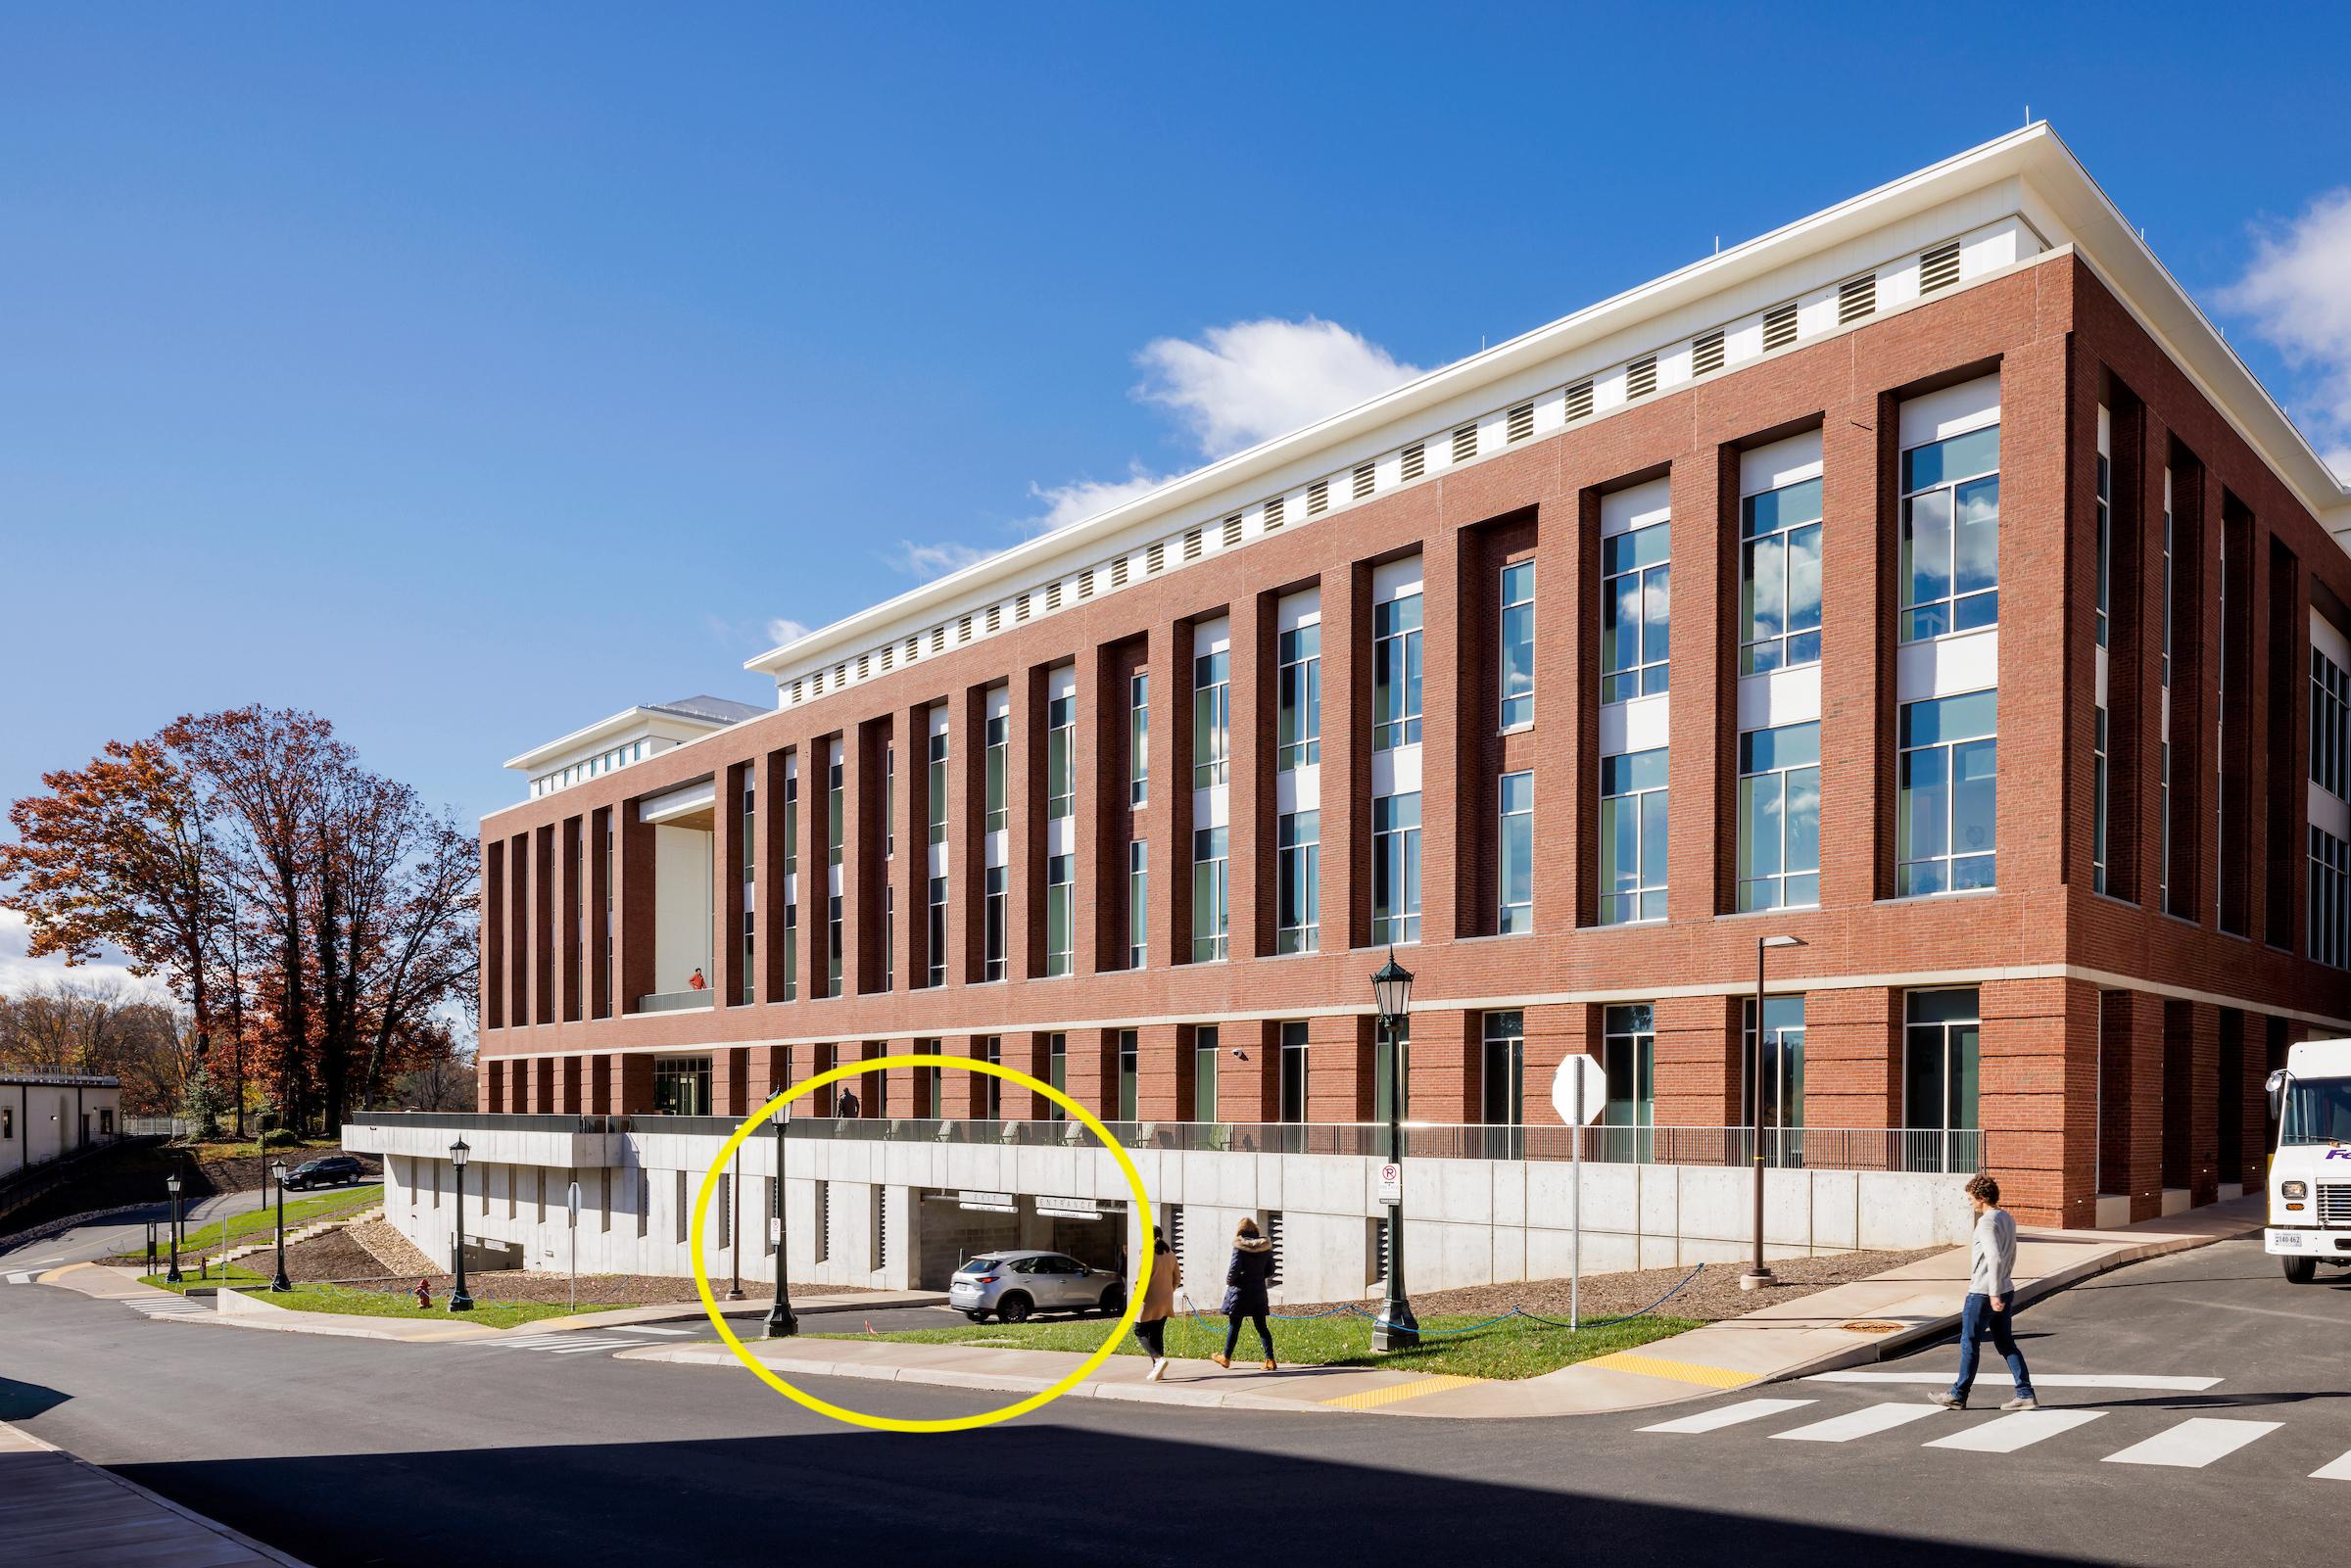 The back of the brick Student Health and Wellness building, the parking garage entrance for patients and visitors is circled in yellow.